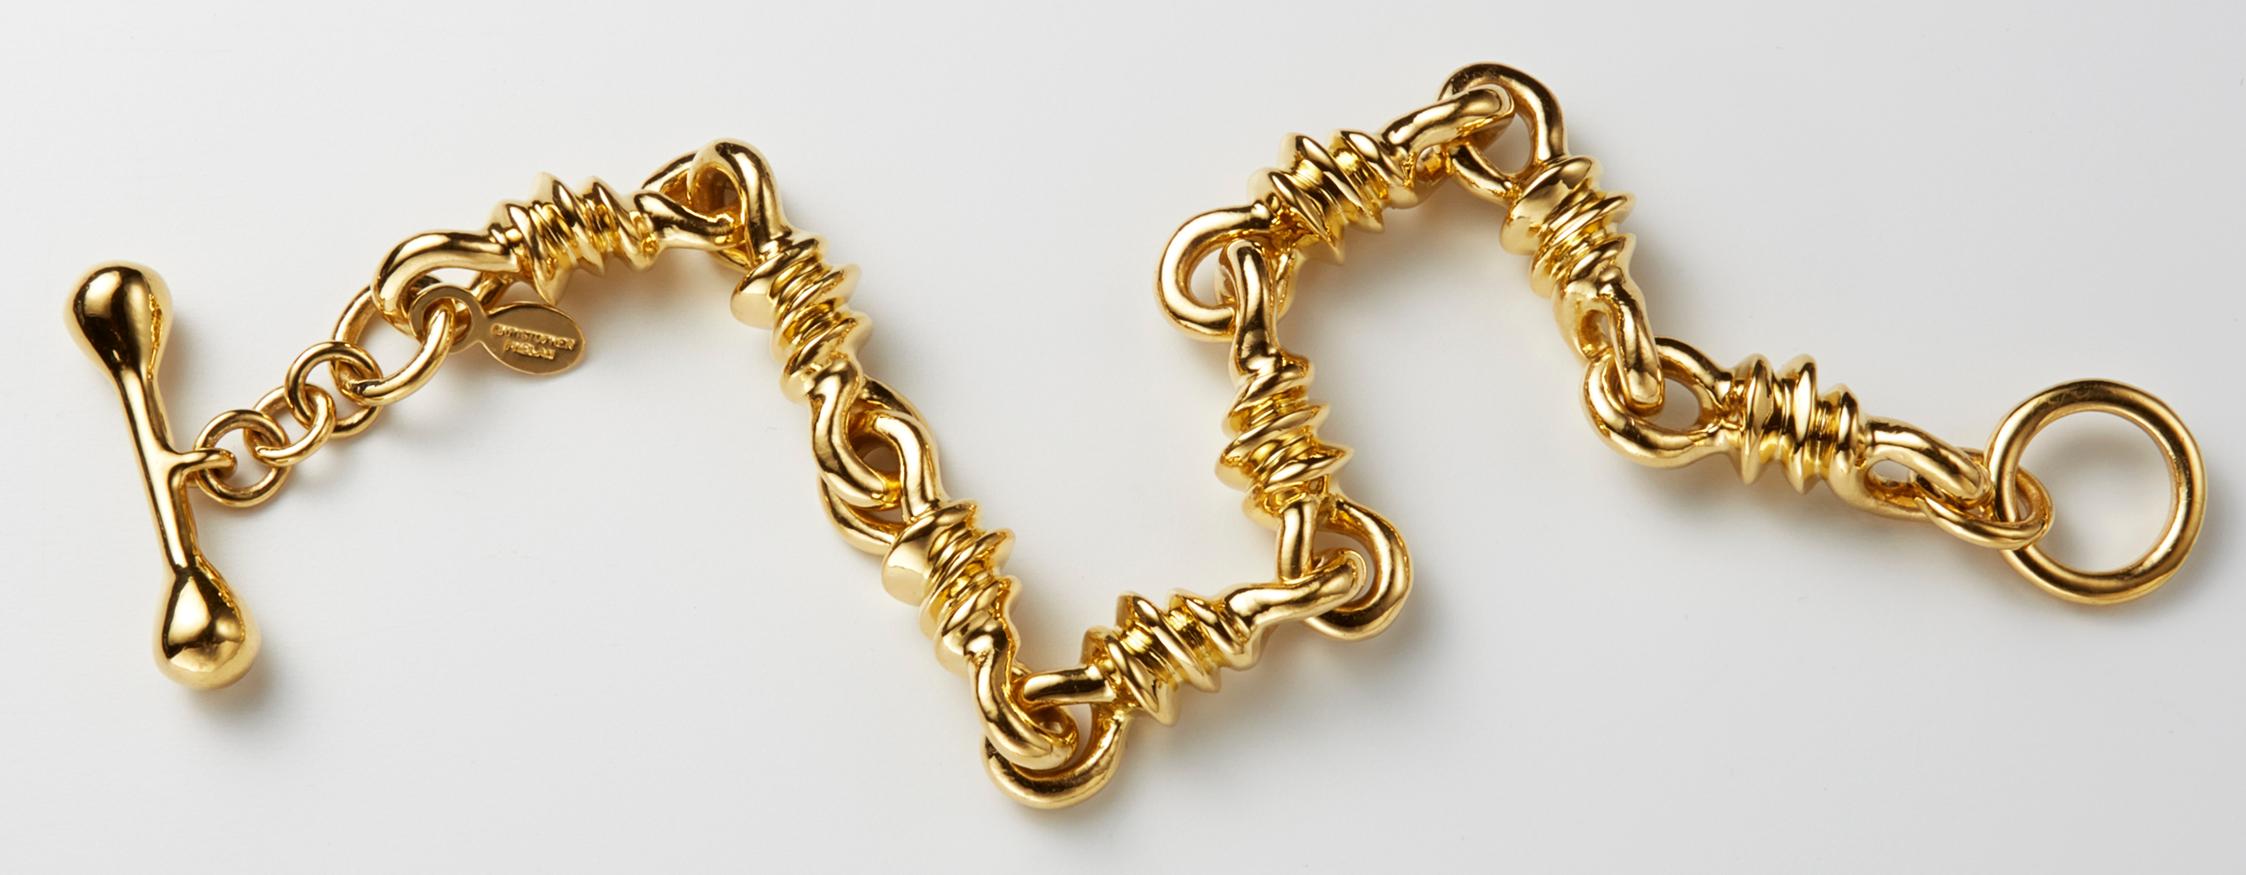 Twisted vine 22K gold bracelet. Dimension of bracelet 9.5 mm wide or .34 inches wide. Weight 3.52 ounces. Bracelet length size 8 ½ inches. Can be sized to any length.
Hand made by goldsmith Christopher Phelan.


